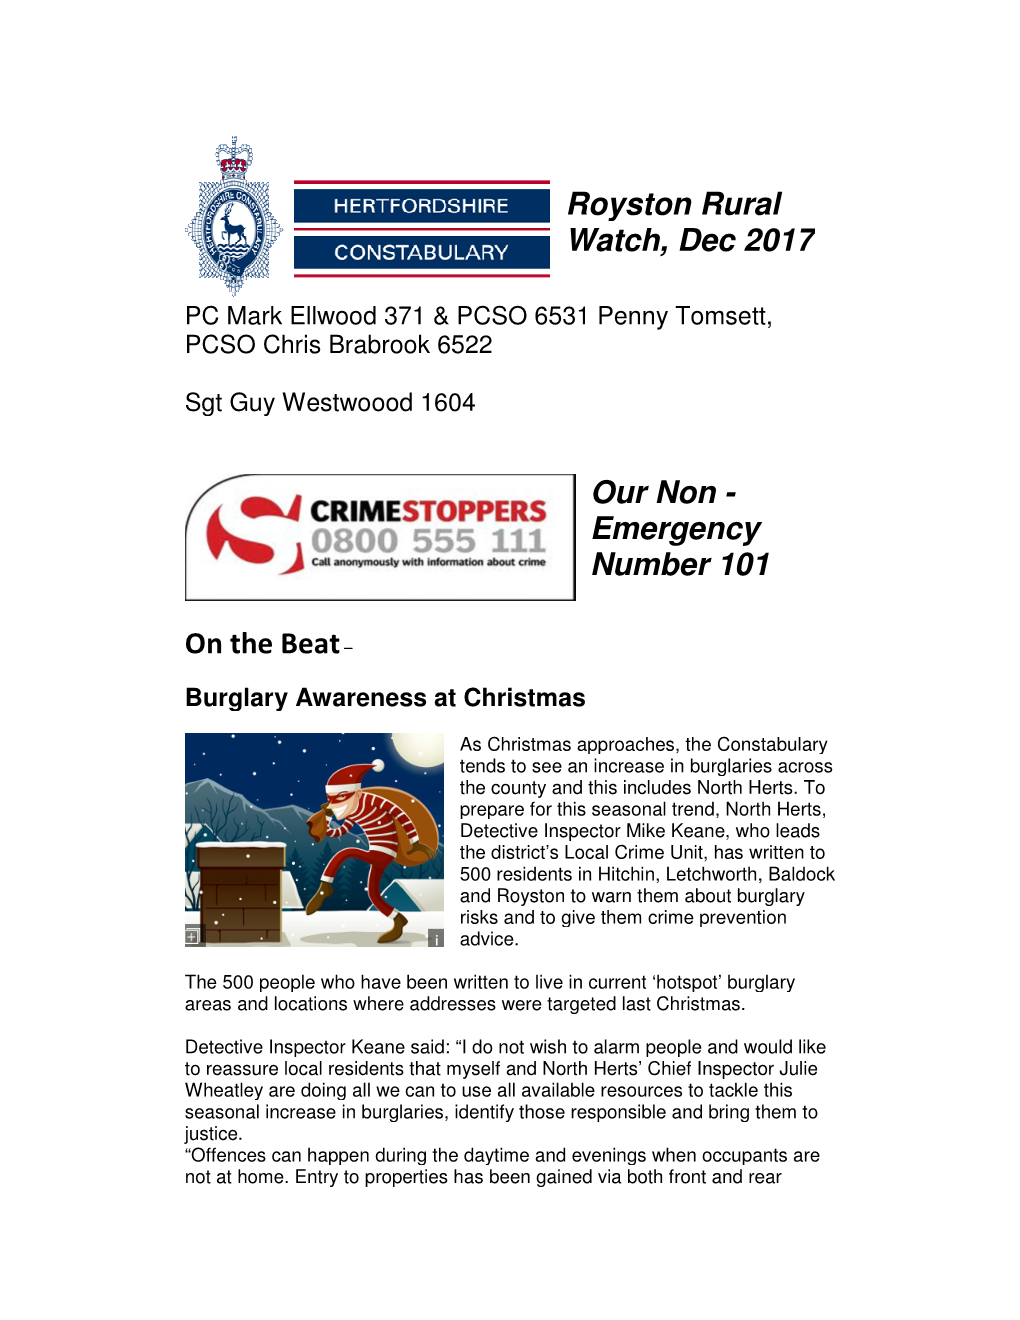 On the Beat– Royston Rural Watch, Dec 2017 Our